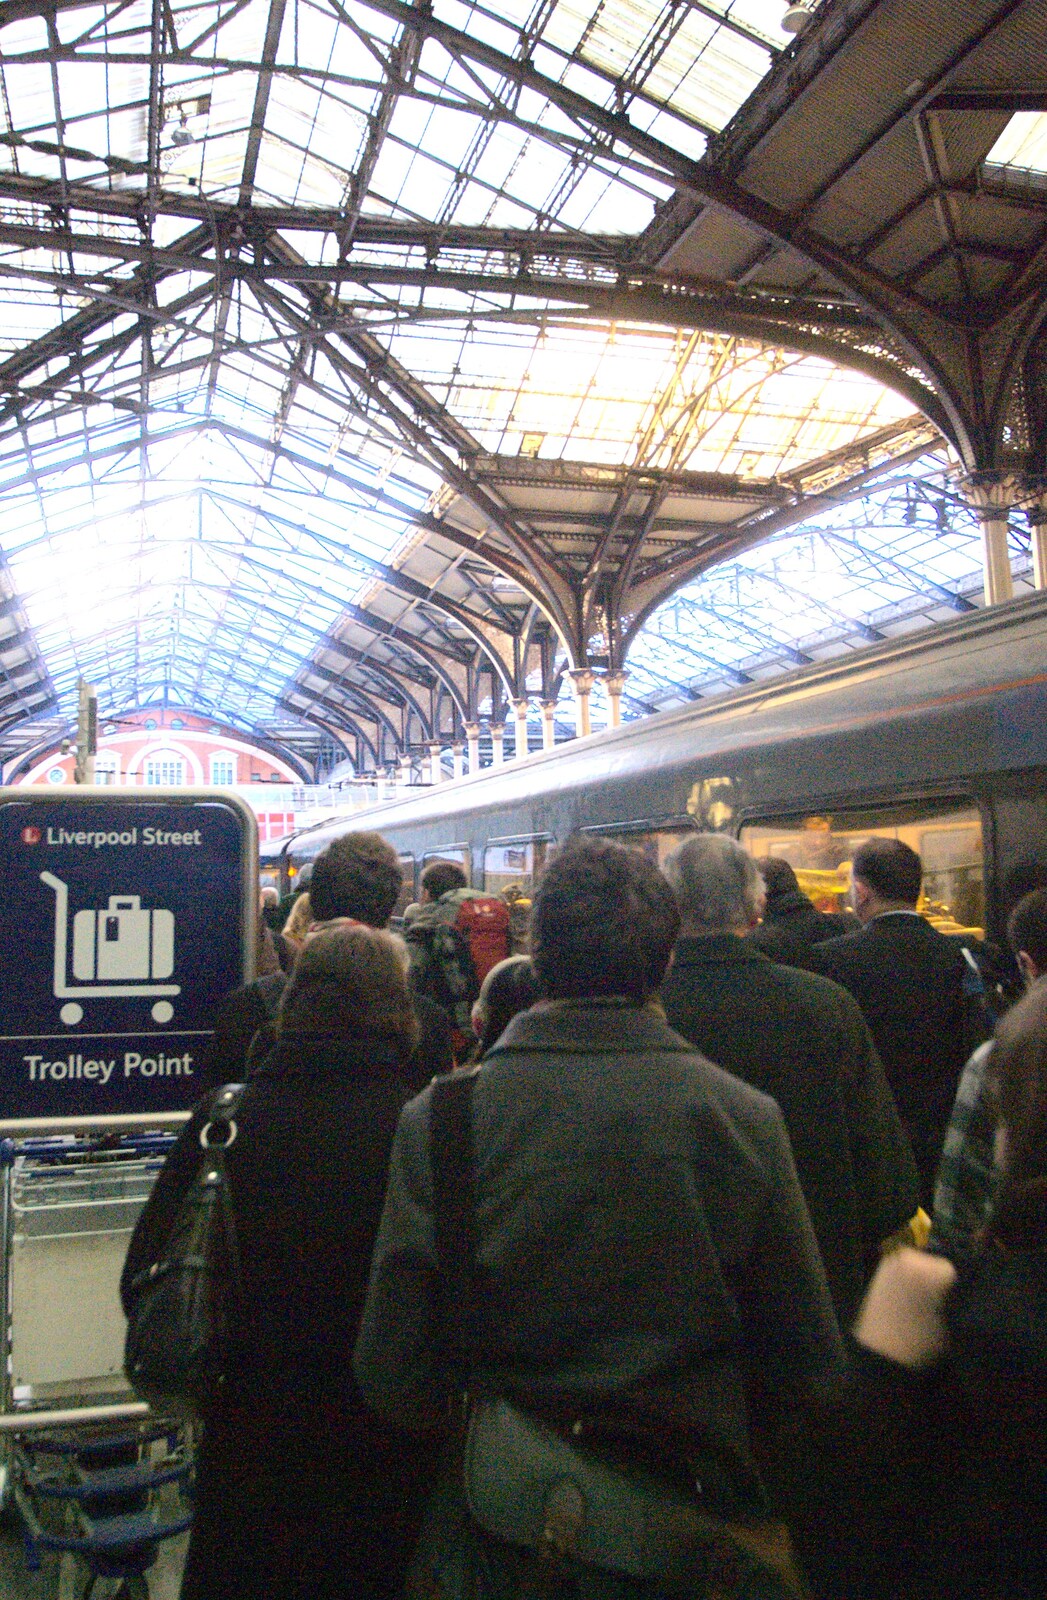 The train is packed with two loads of passengers from A TouchType Christmas, Southwark, London - 15th December 2011